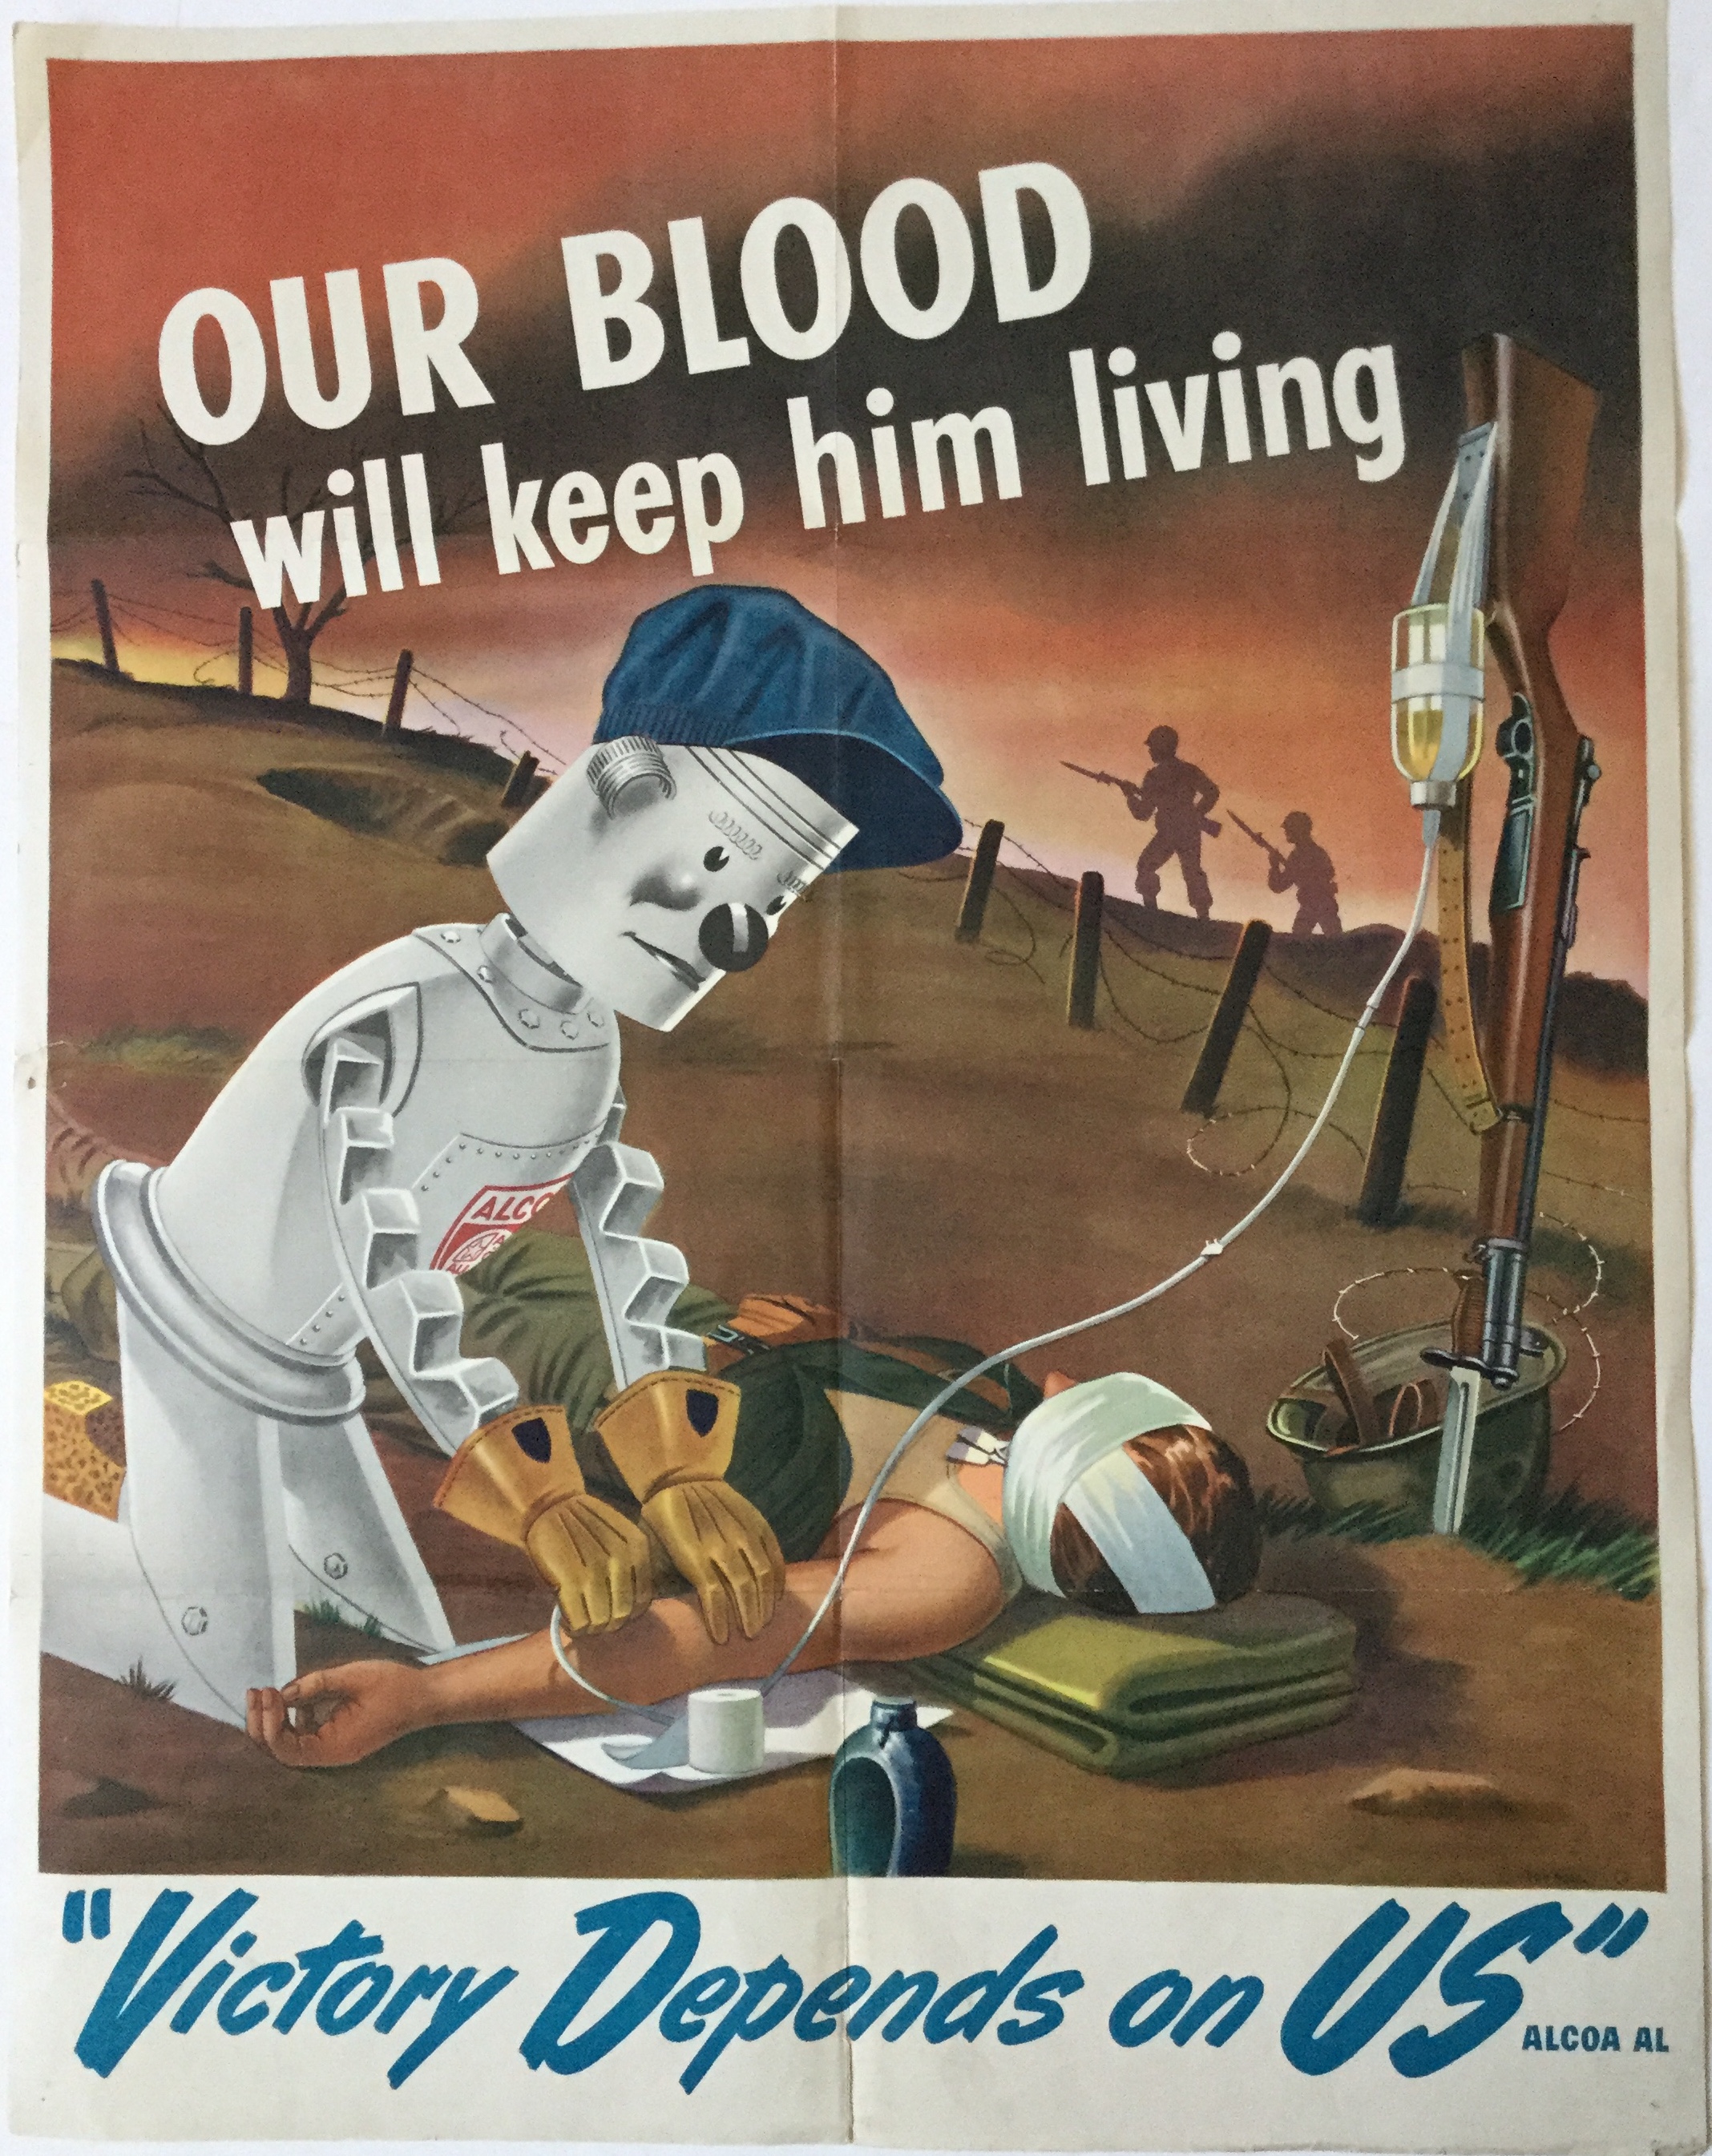 J461	OUR BLOOD WILL KEEP HIM LIVING - VICTORY DEPENDS ON US - ALCOA AL